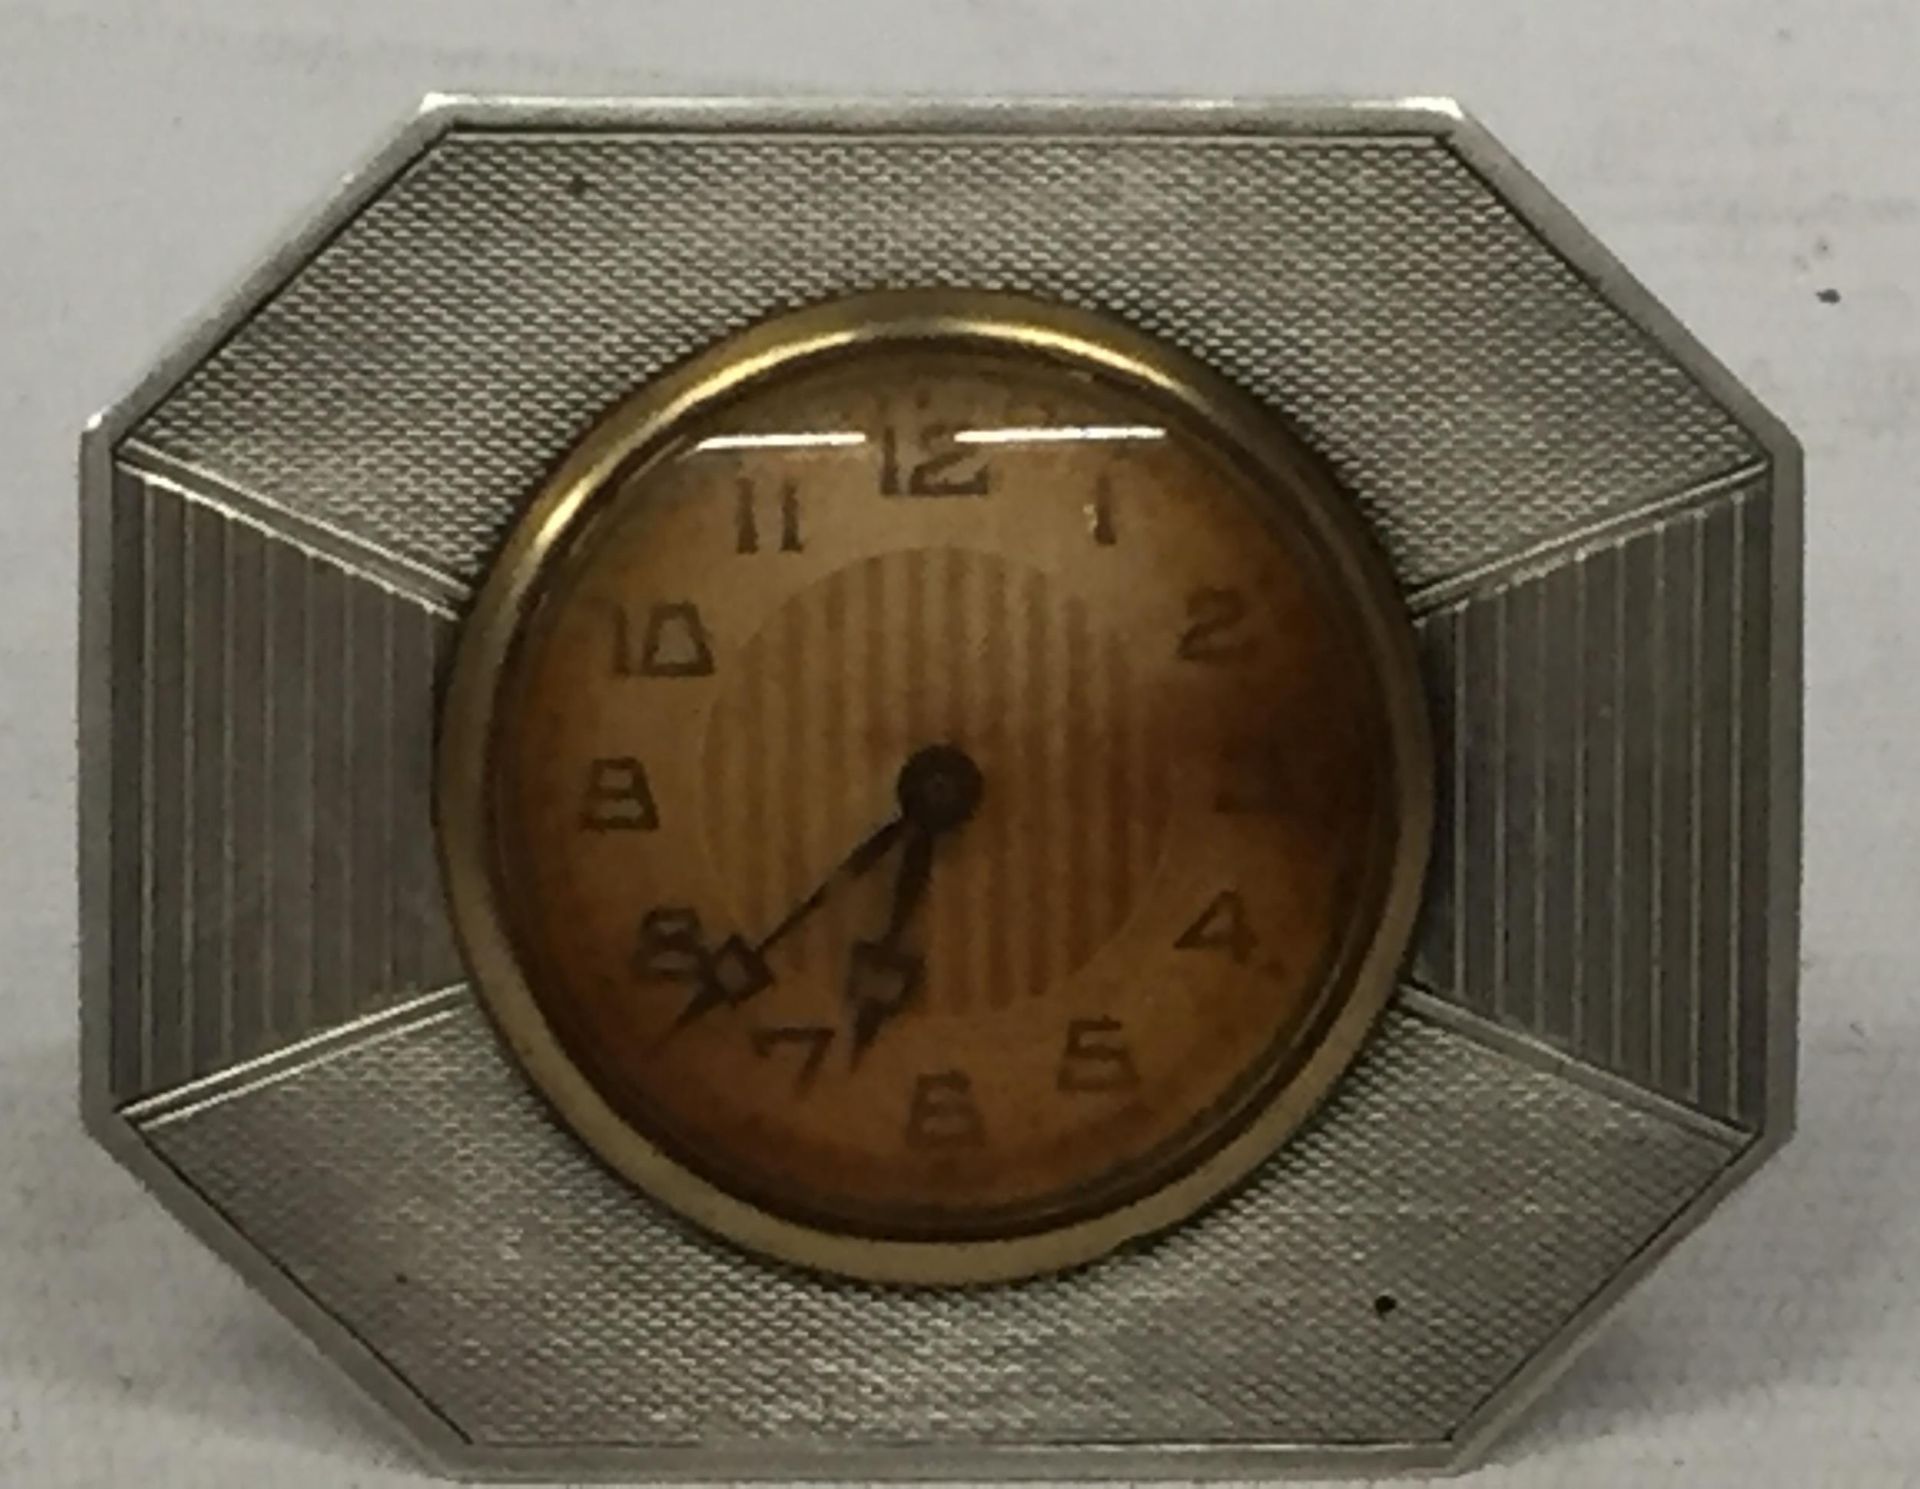 AN ART DECO HALLMARKED SILVER CLOCK WITH ENGINE TURNED DESIGN